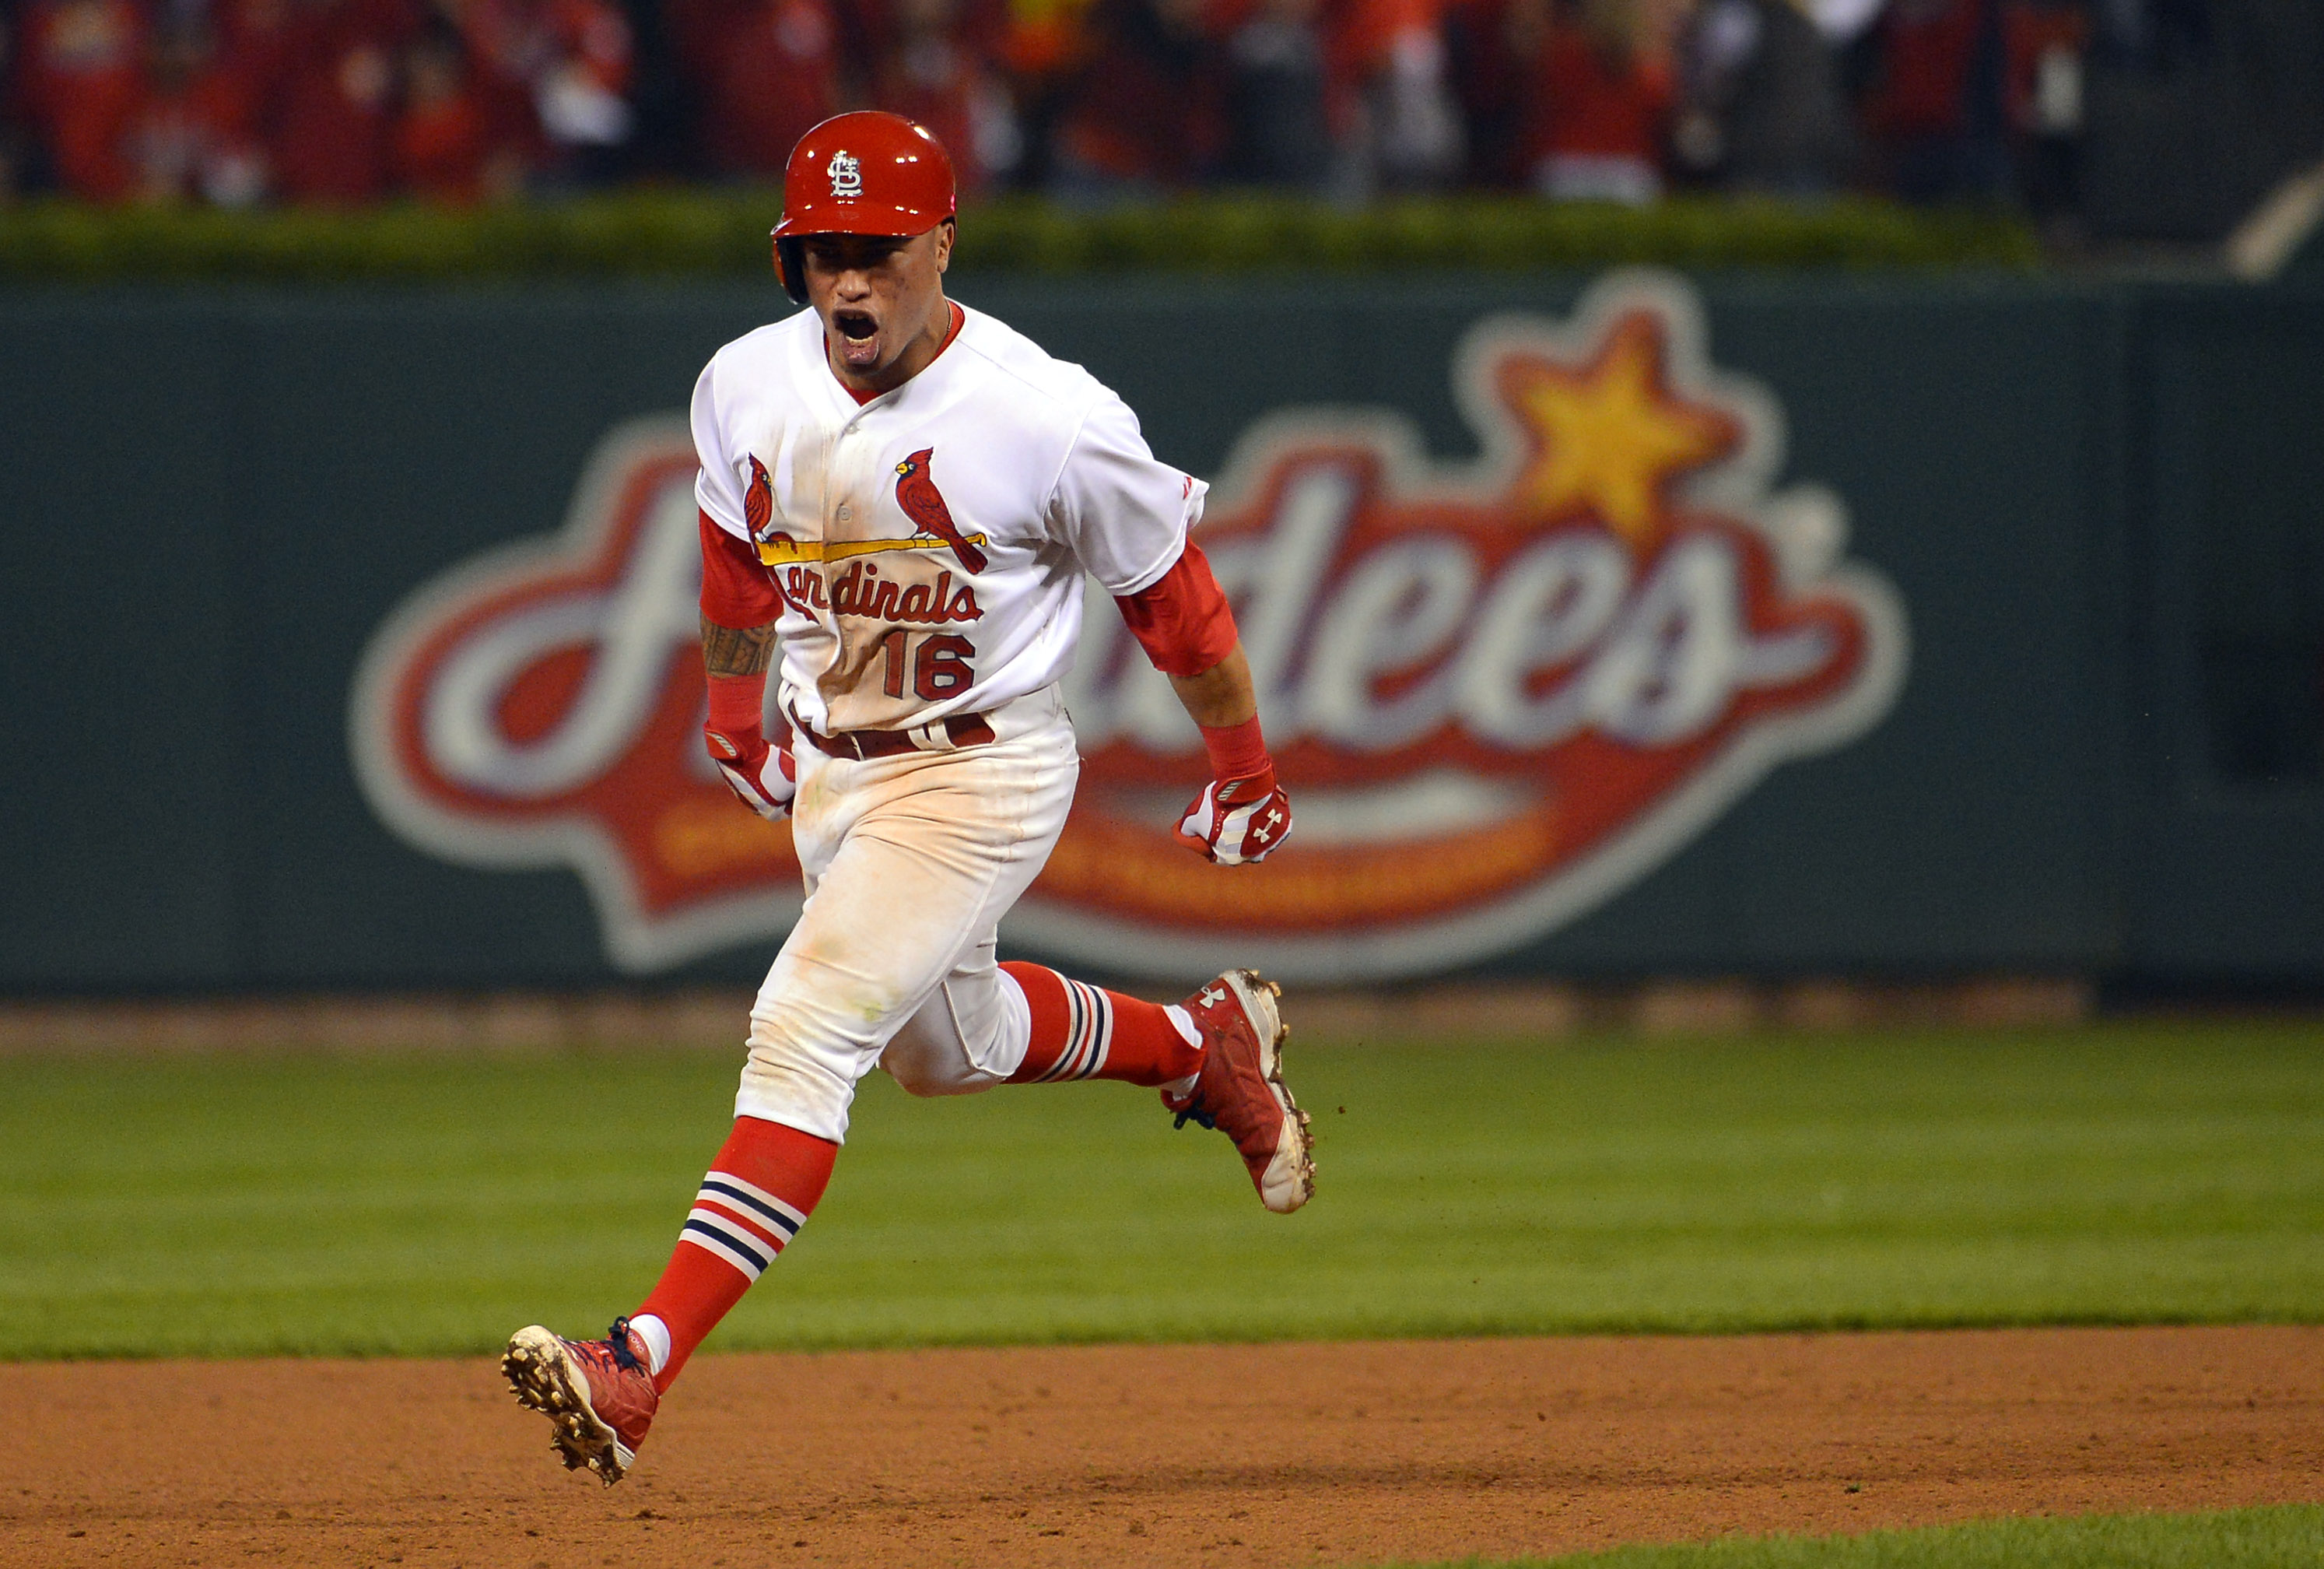 Wong's HR gives Cardinals dramatic Game 2 win